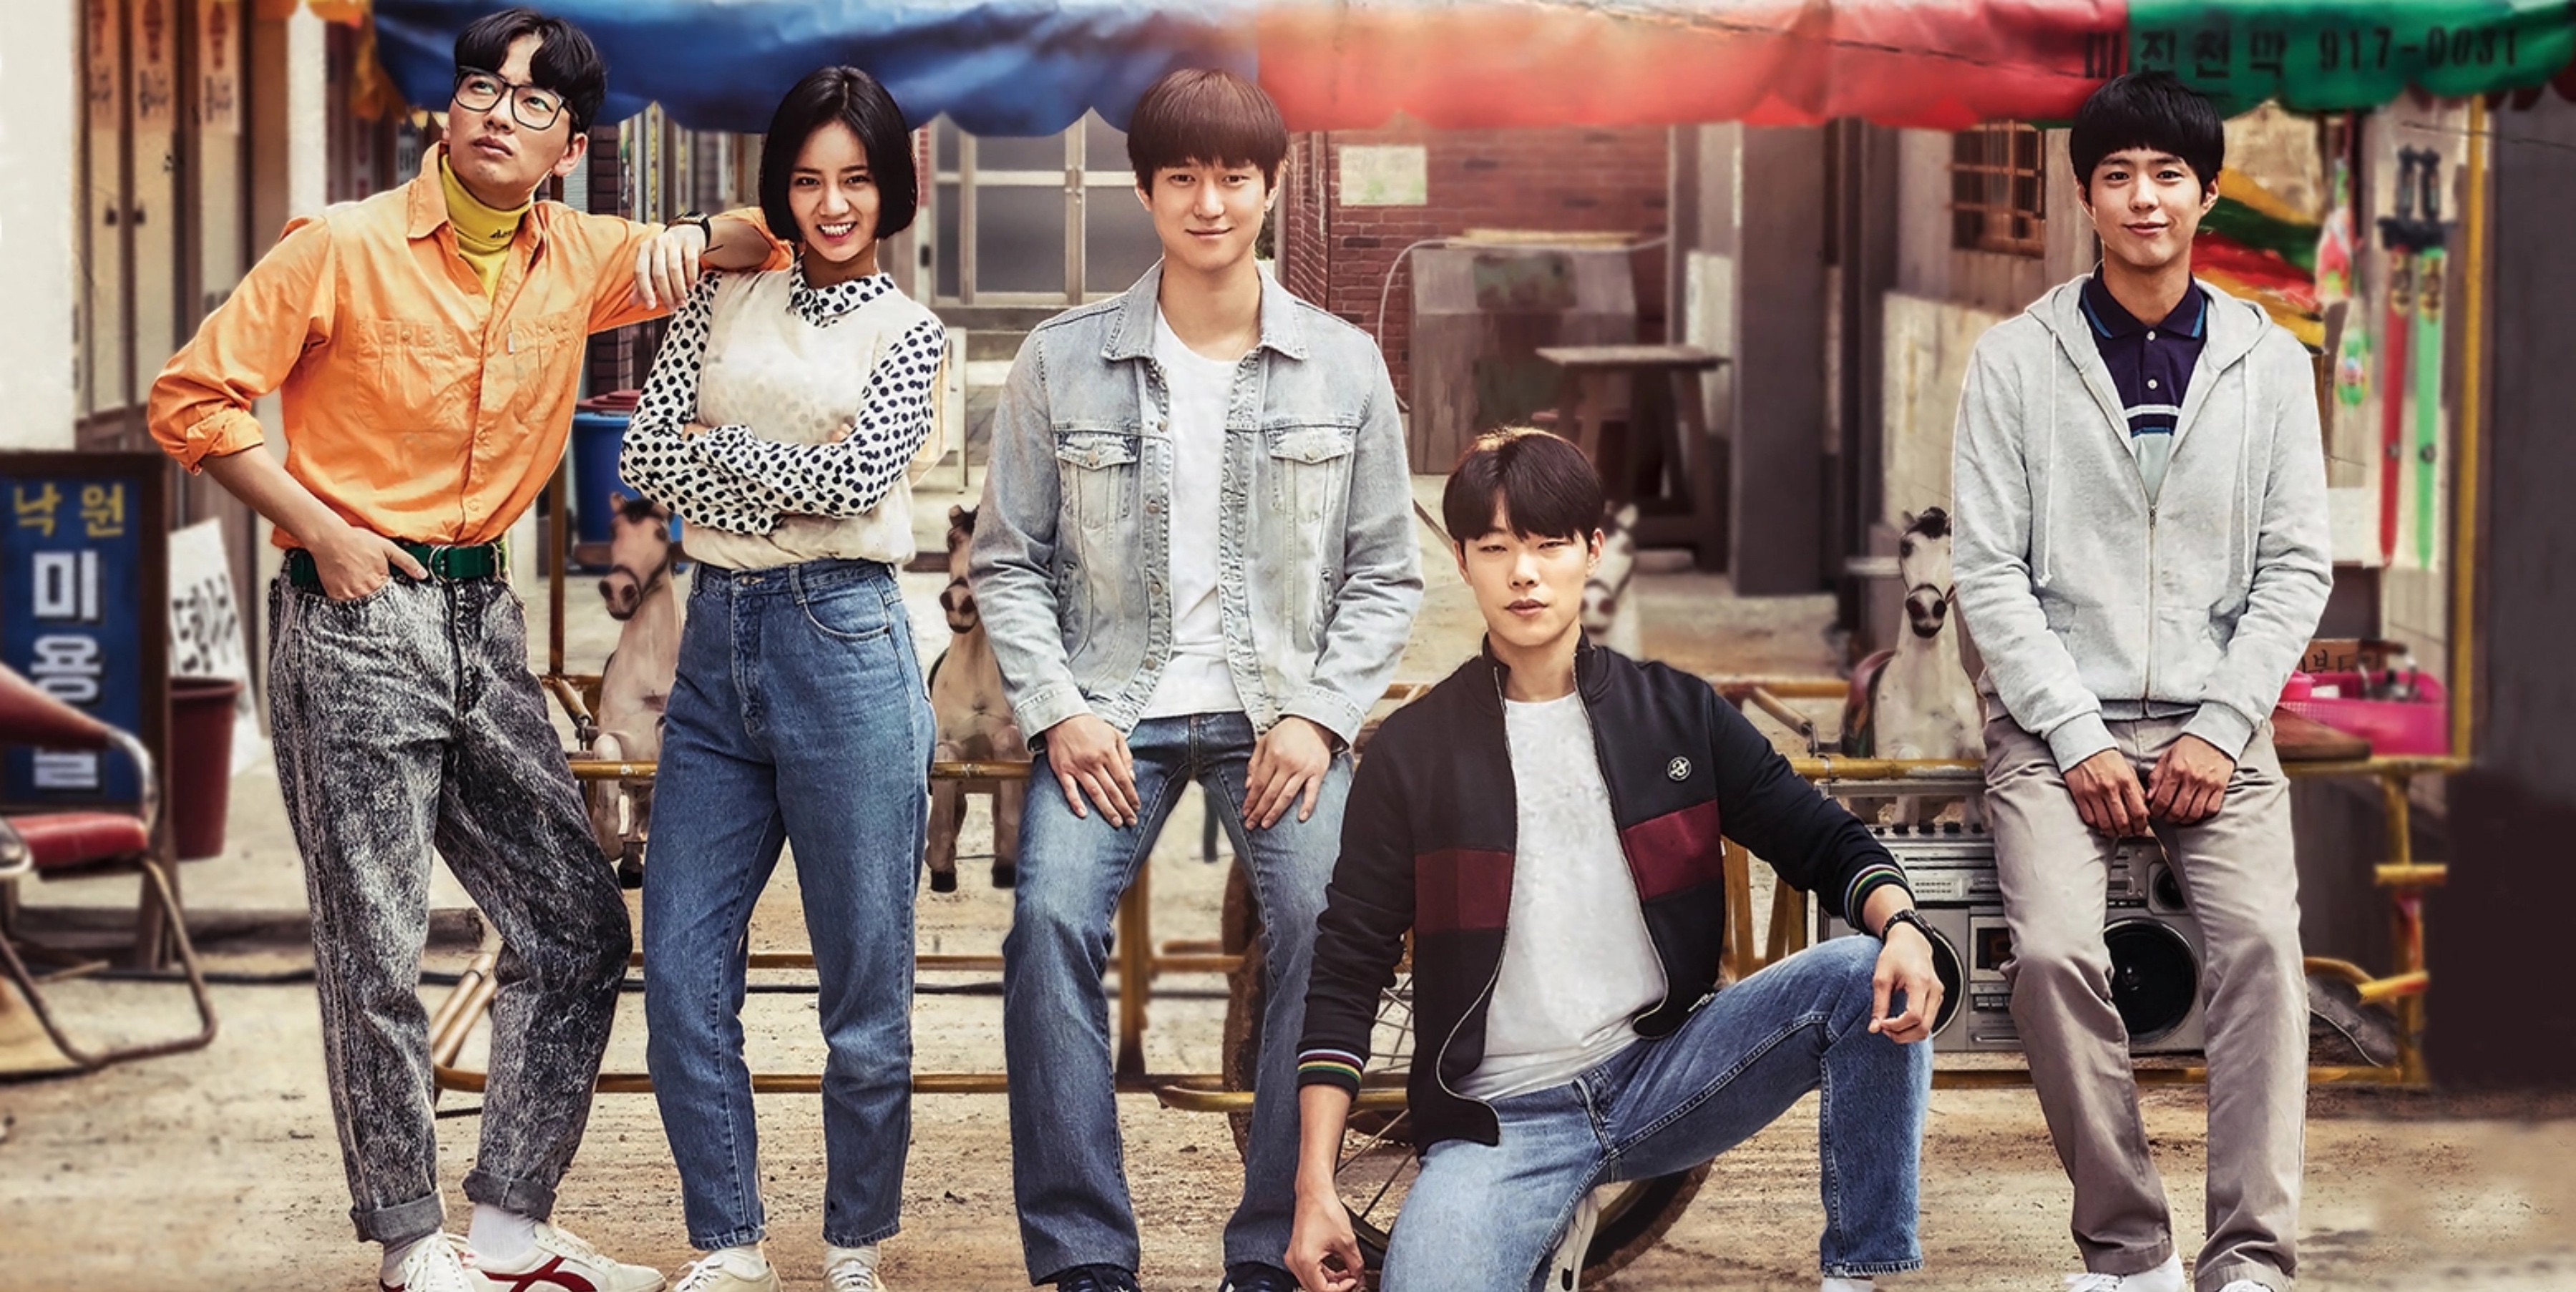 Main characters of 'Reply 1988' K-drama in town neighborhood wearing civilian clothes